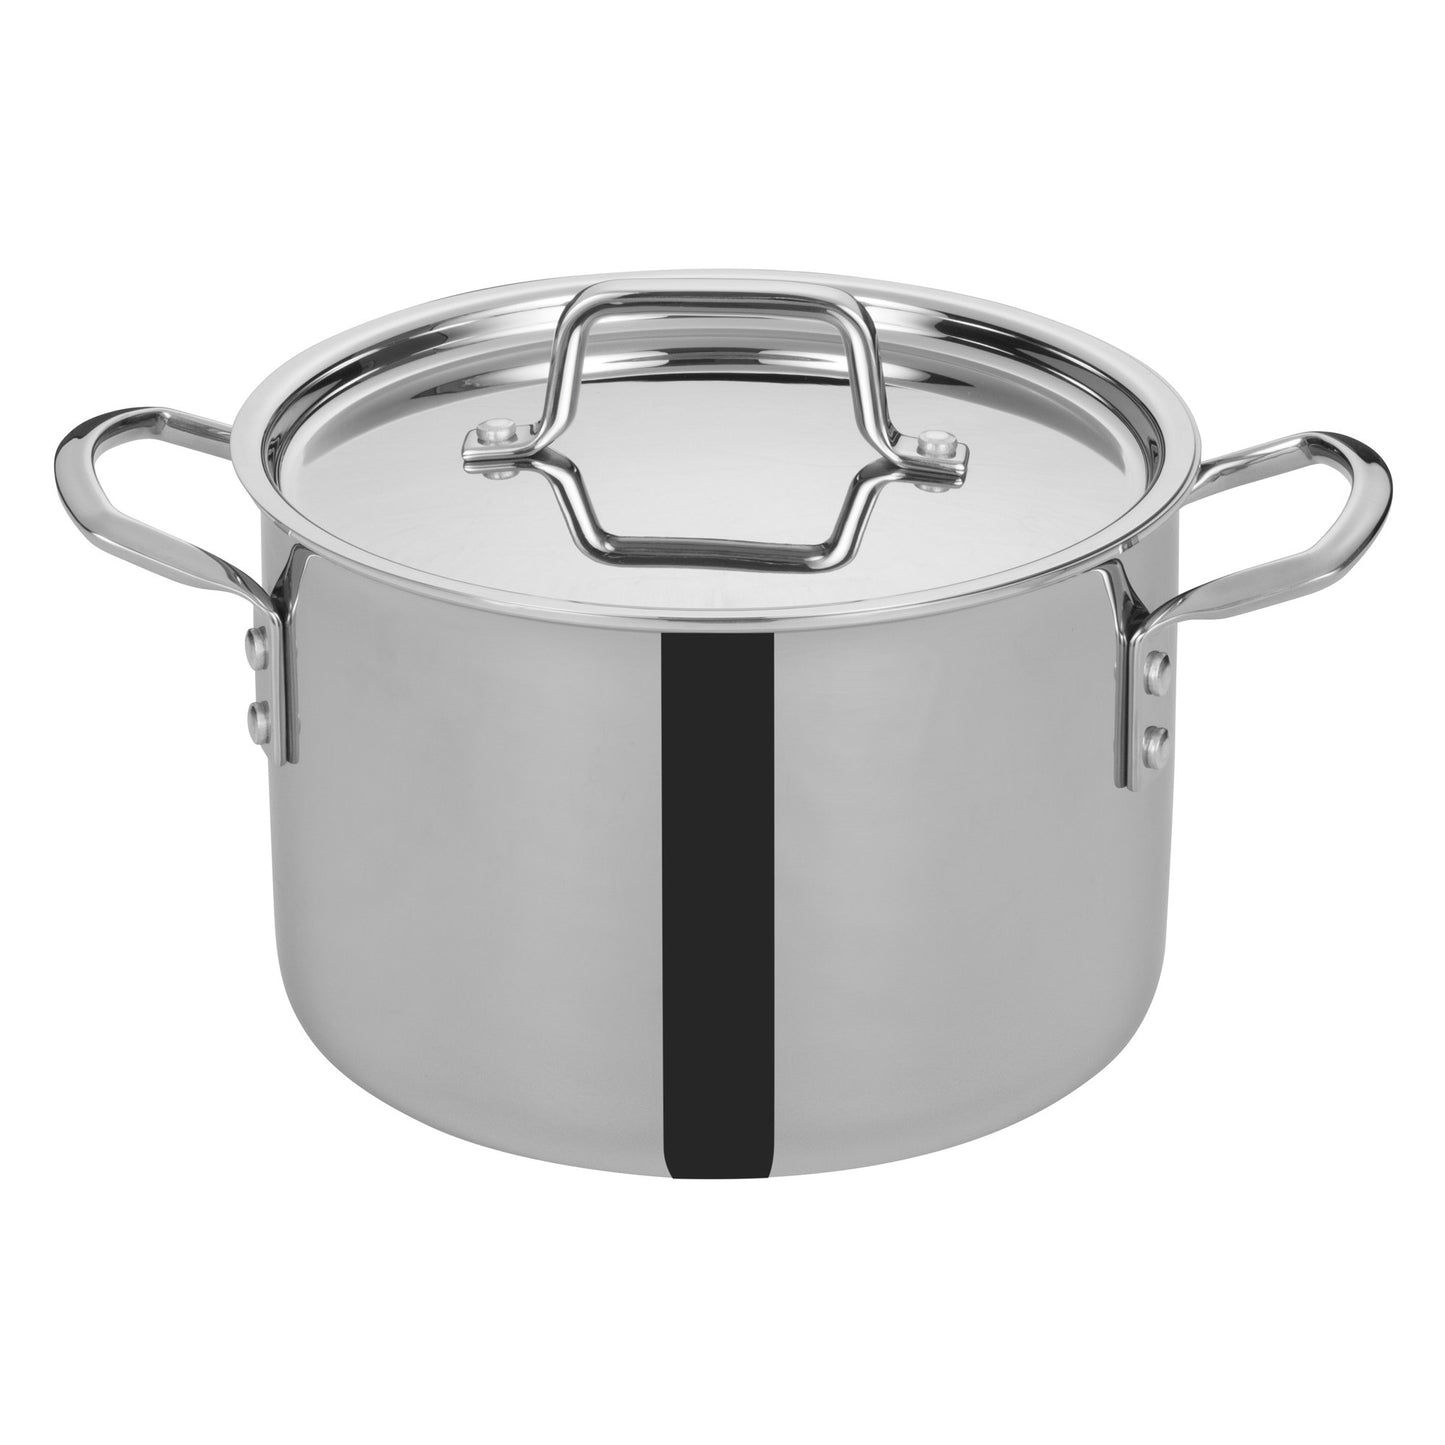 TGSP-6 - Tri-Gen Tri-Ply Stainless Steel Stock Pot with Cover - 6 Quart